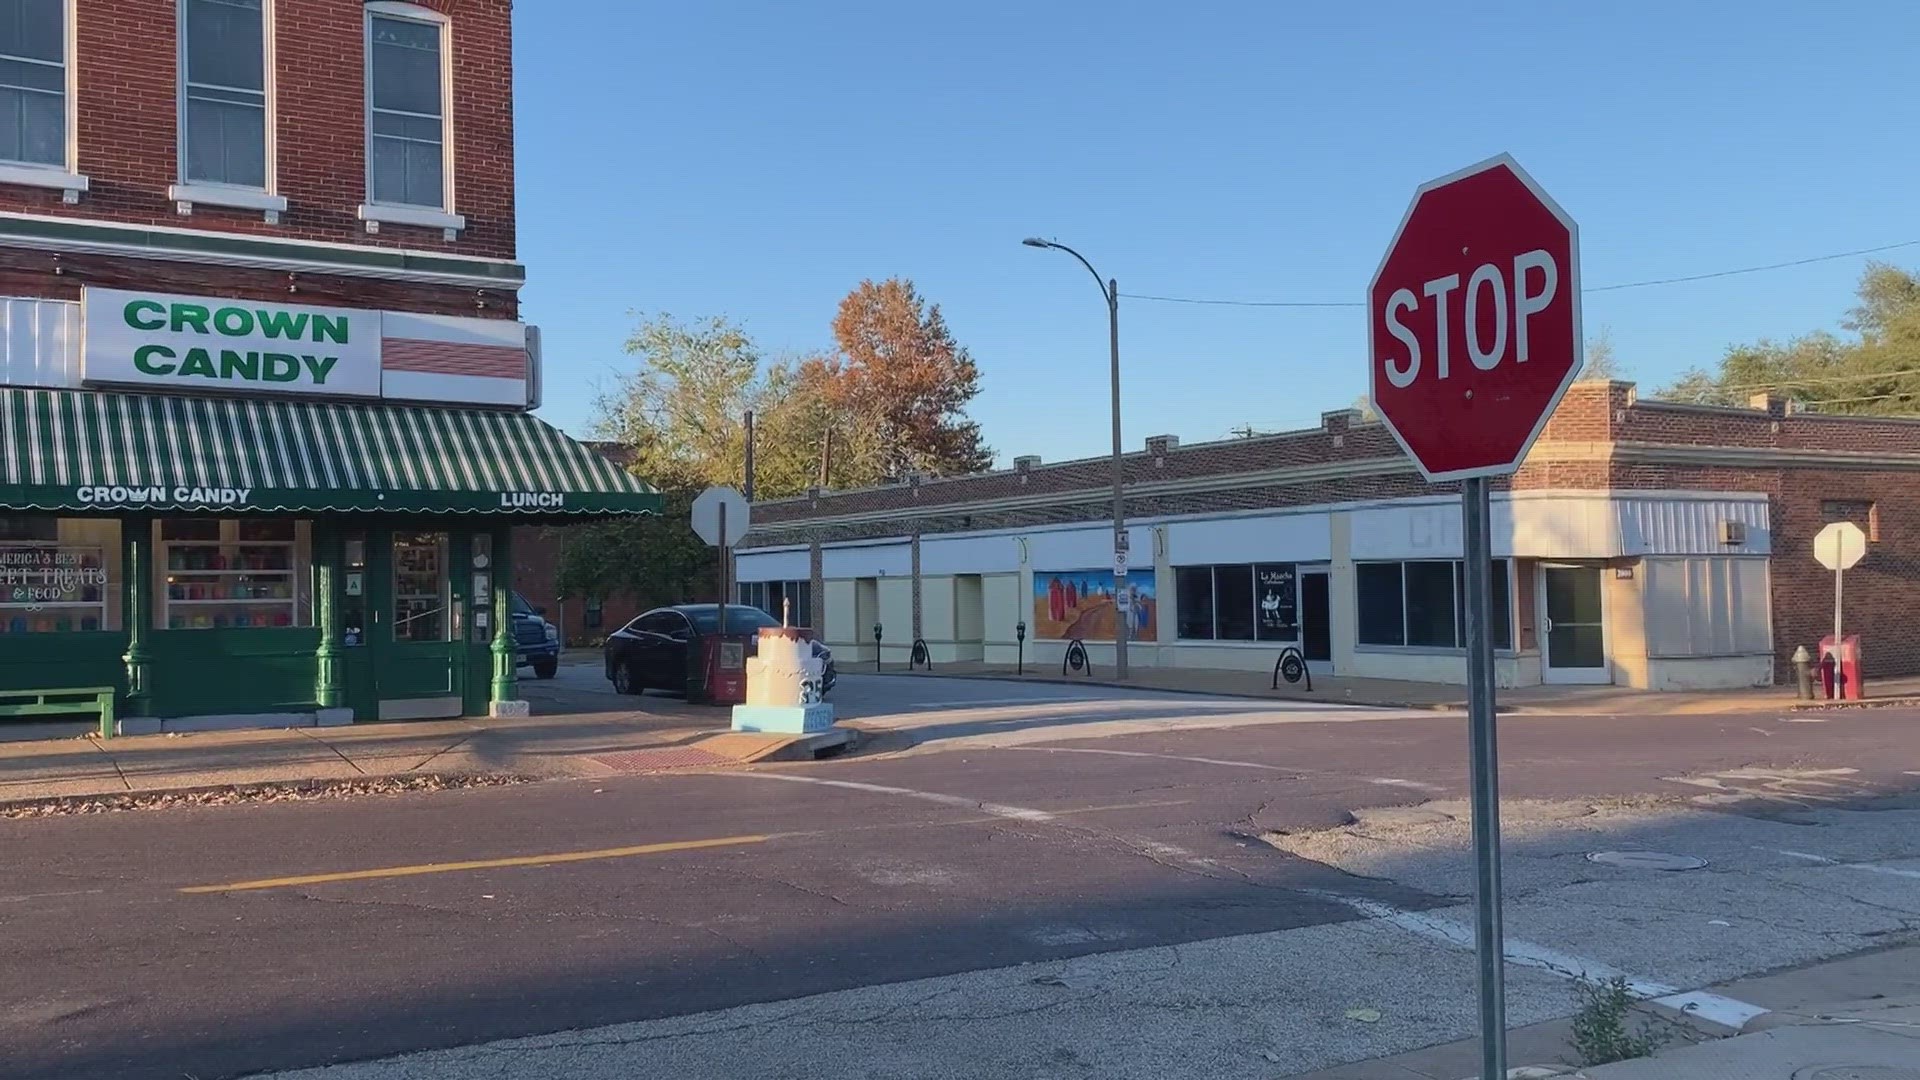 The incident has pushed a local business owner to continue advocating for safer streets.